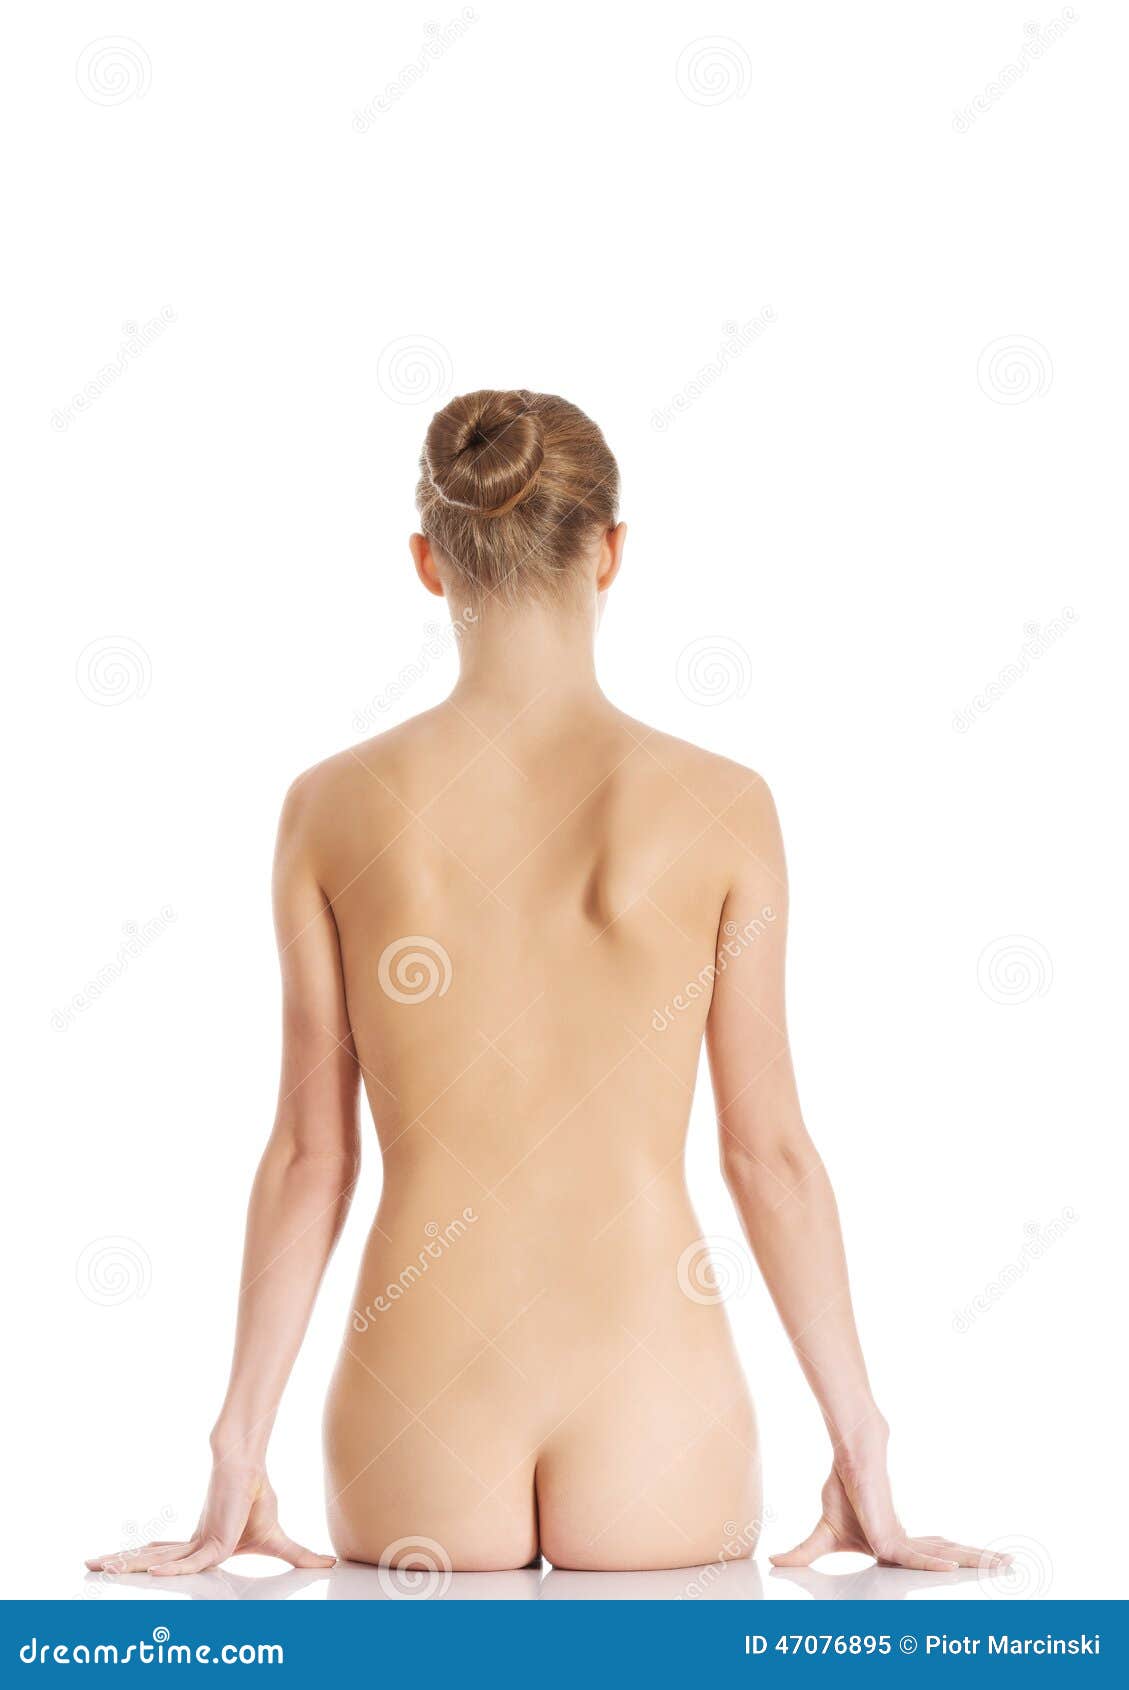 deandre dorsey recommends Nude Woman Back View